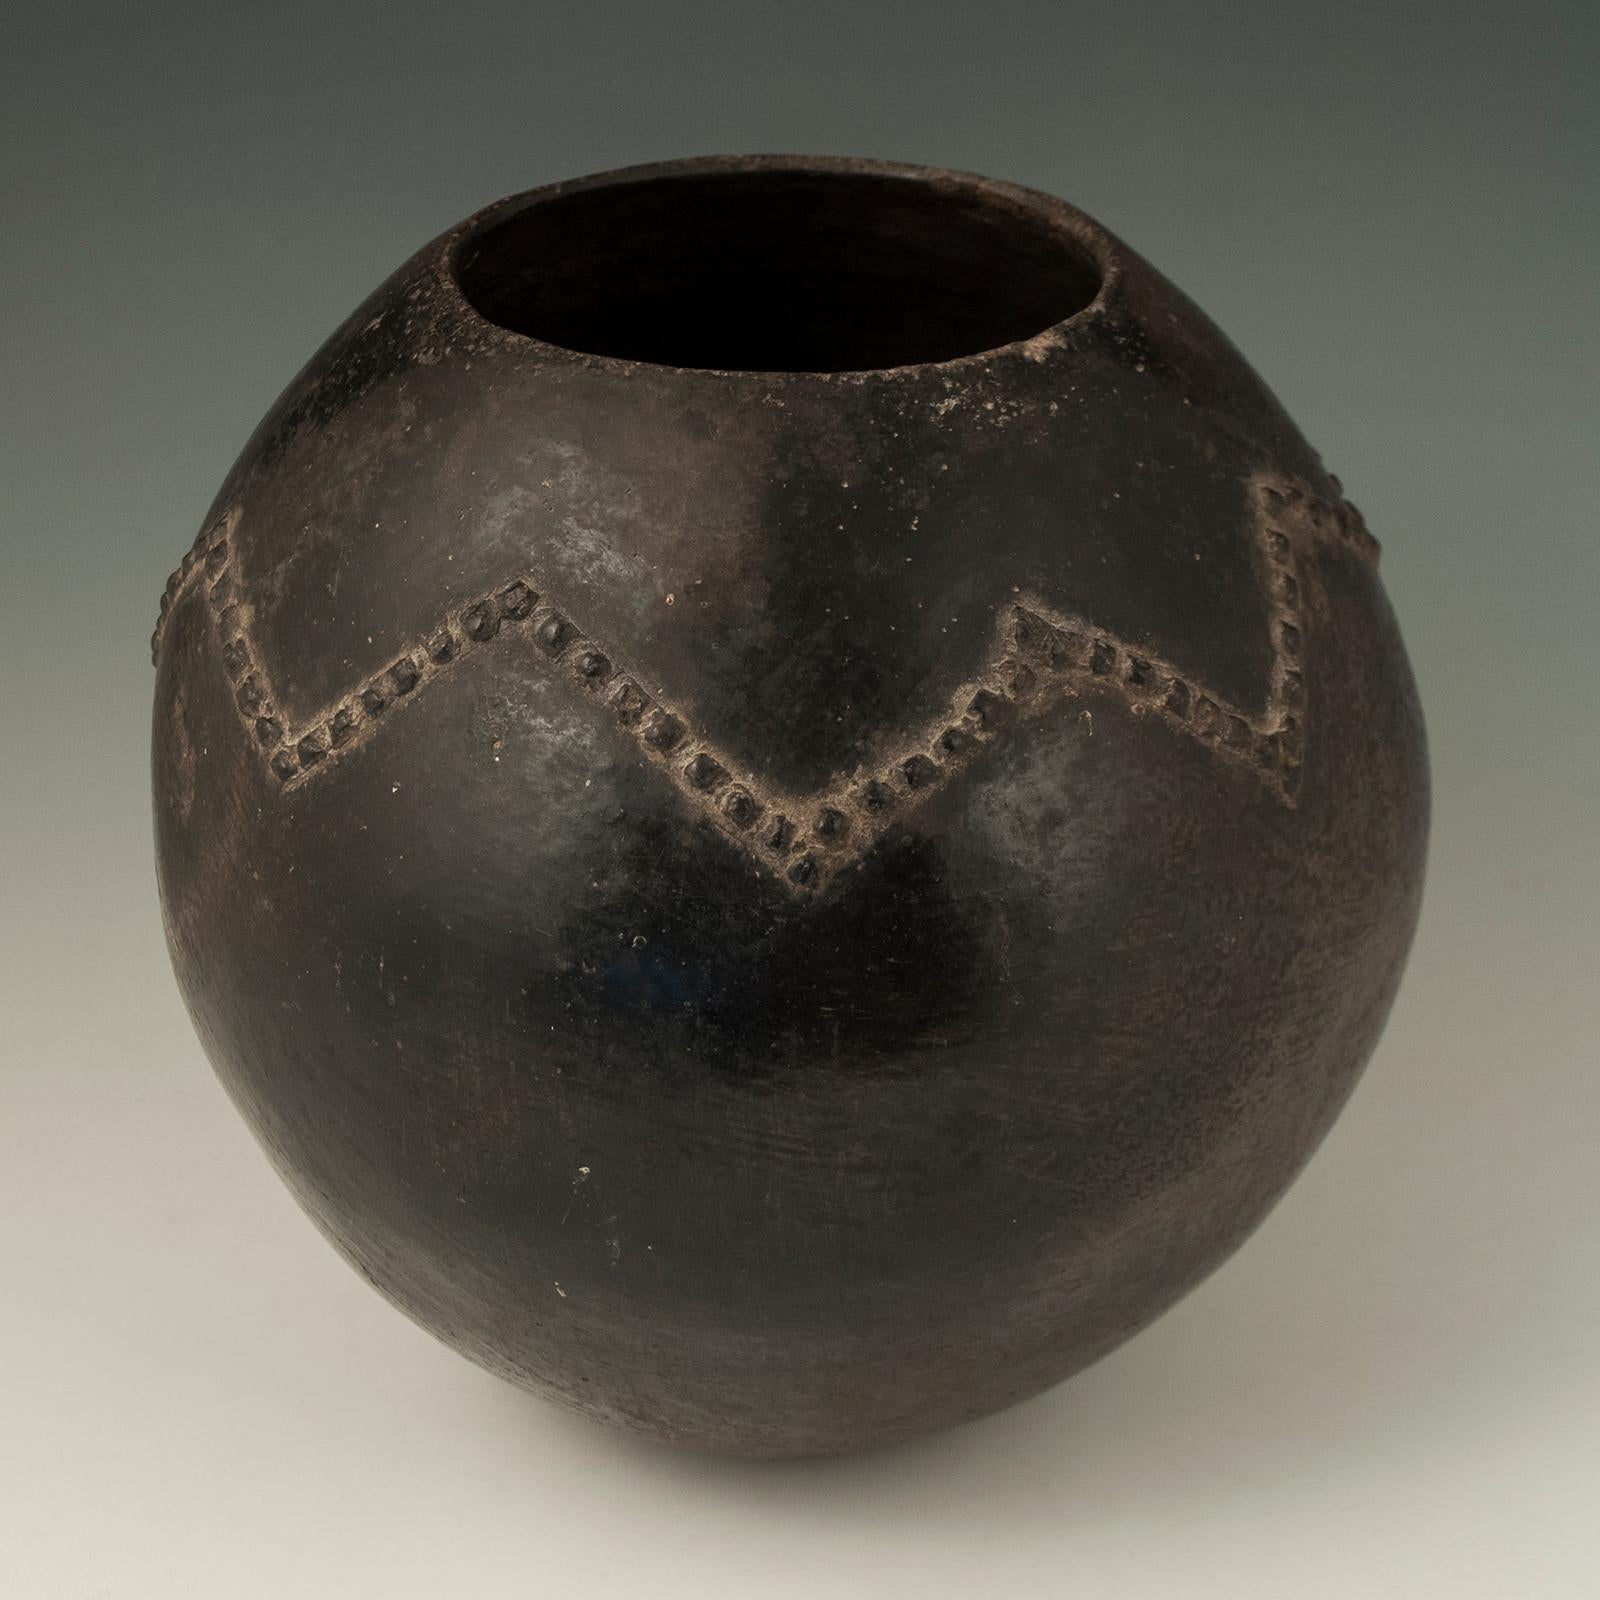 South African Mid-20th Century Tribal Ceramic Beer Pot, Zulu People, South Africa